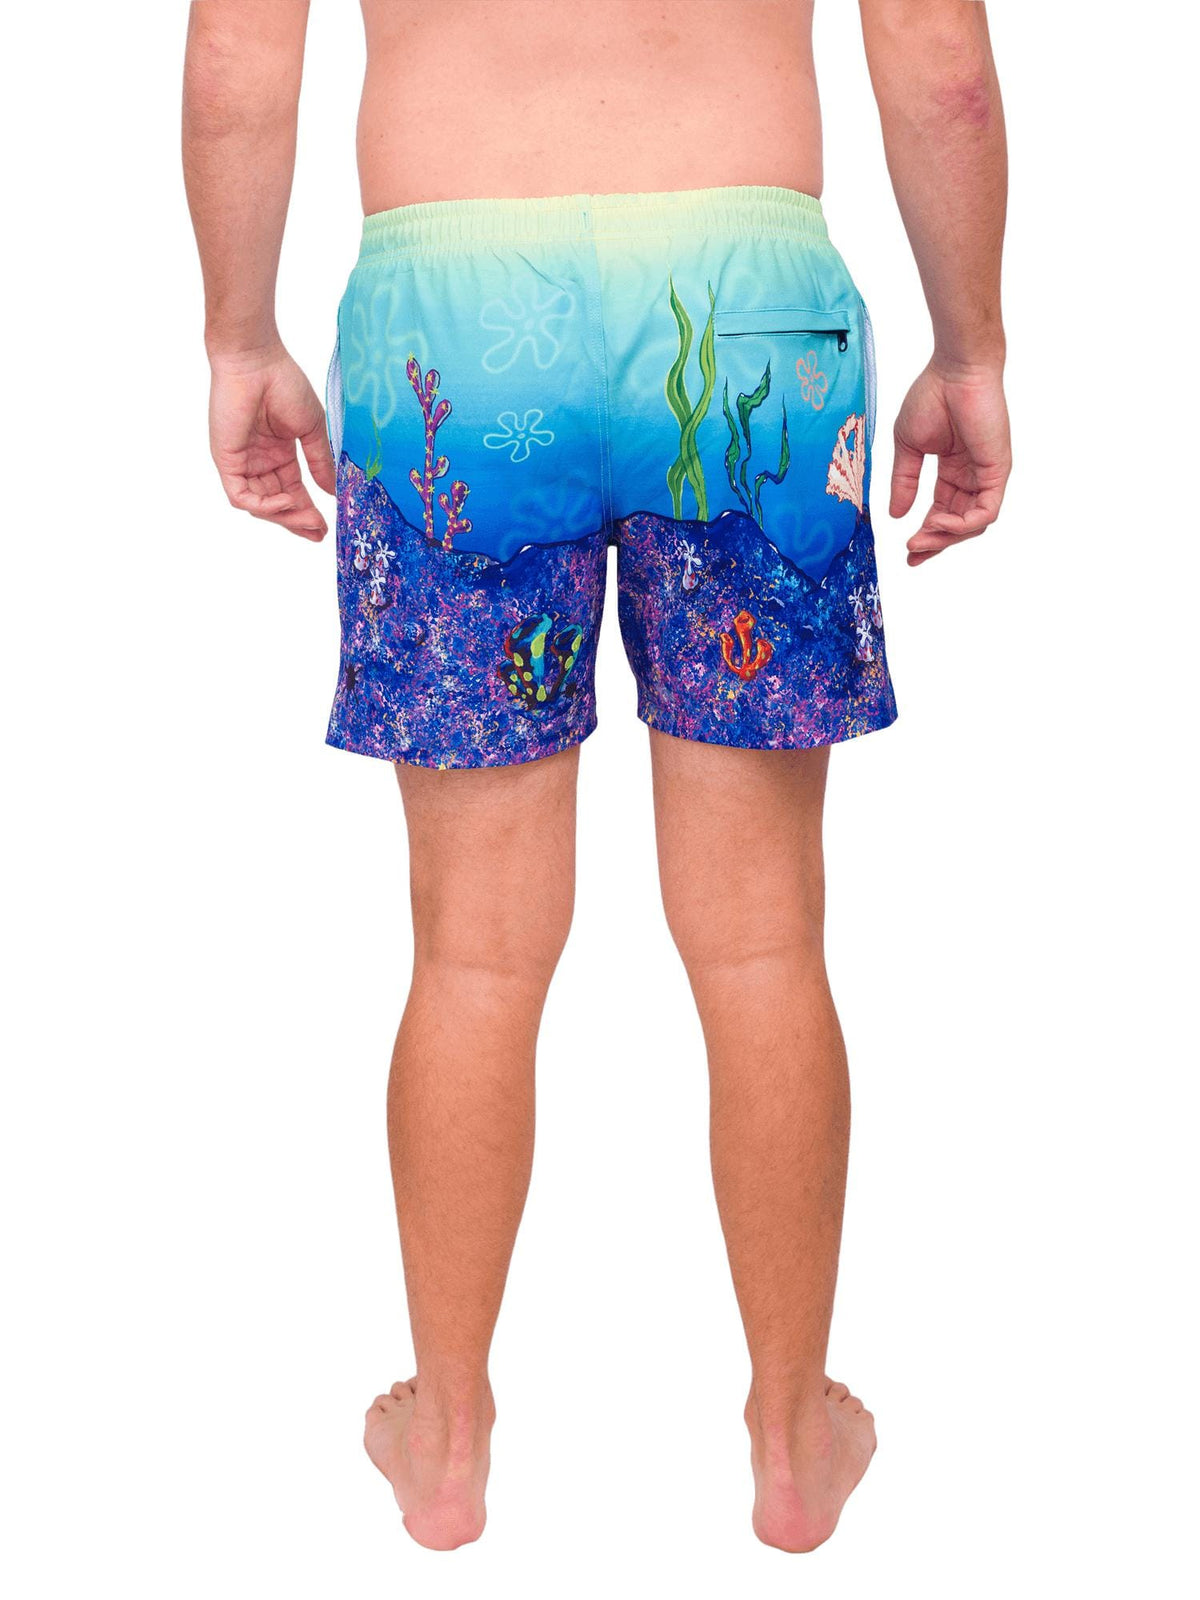 Model: Dalton is a coral biologist who studies the relationship between communities and reef ecosystems. He is 6’3”, 200lbs and is wearing a size L.